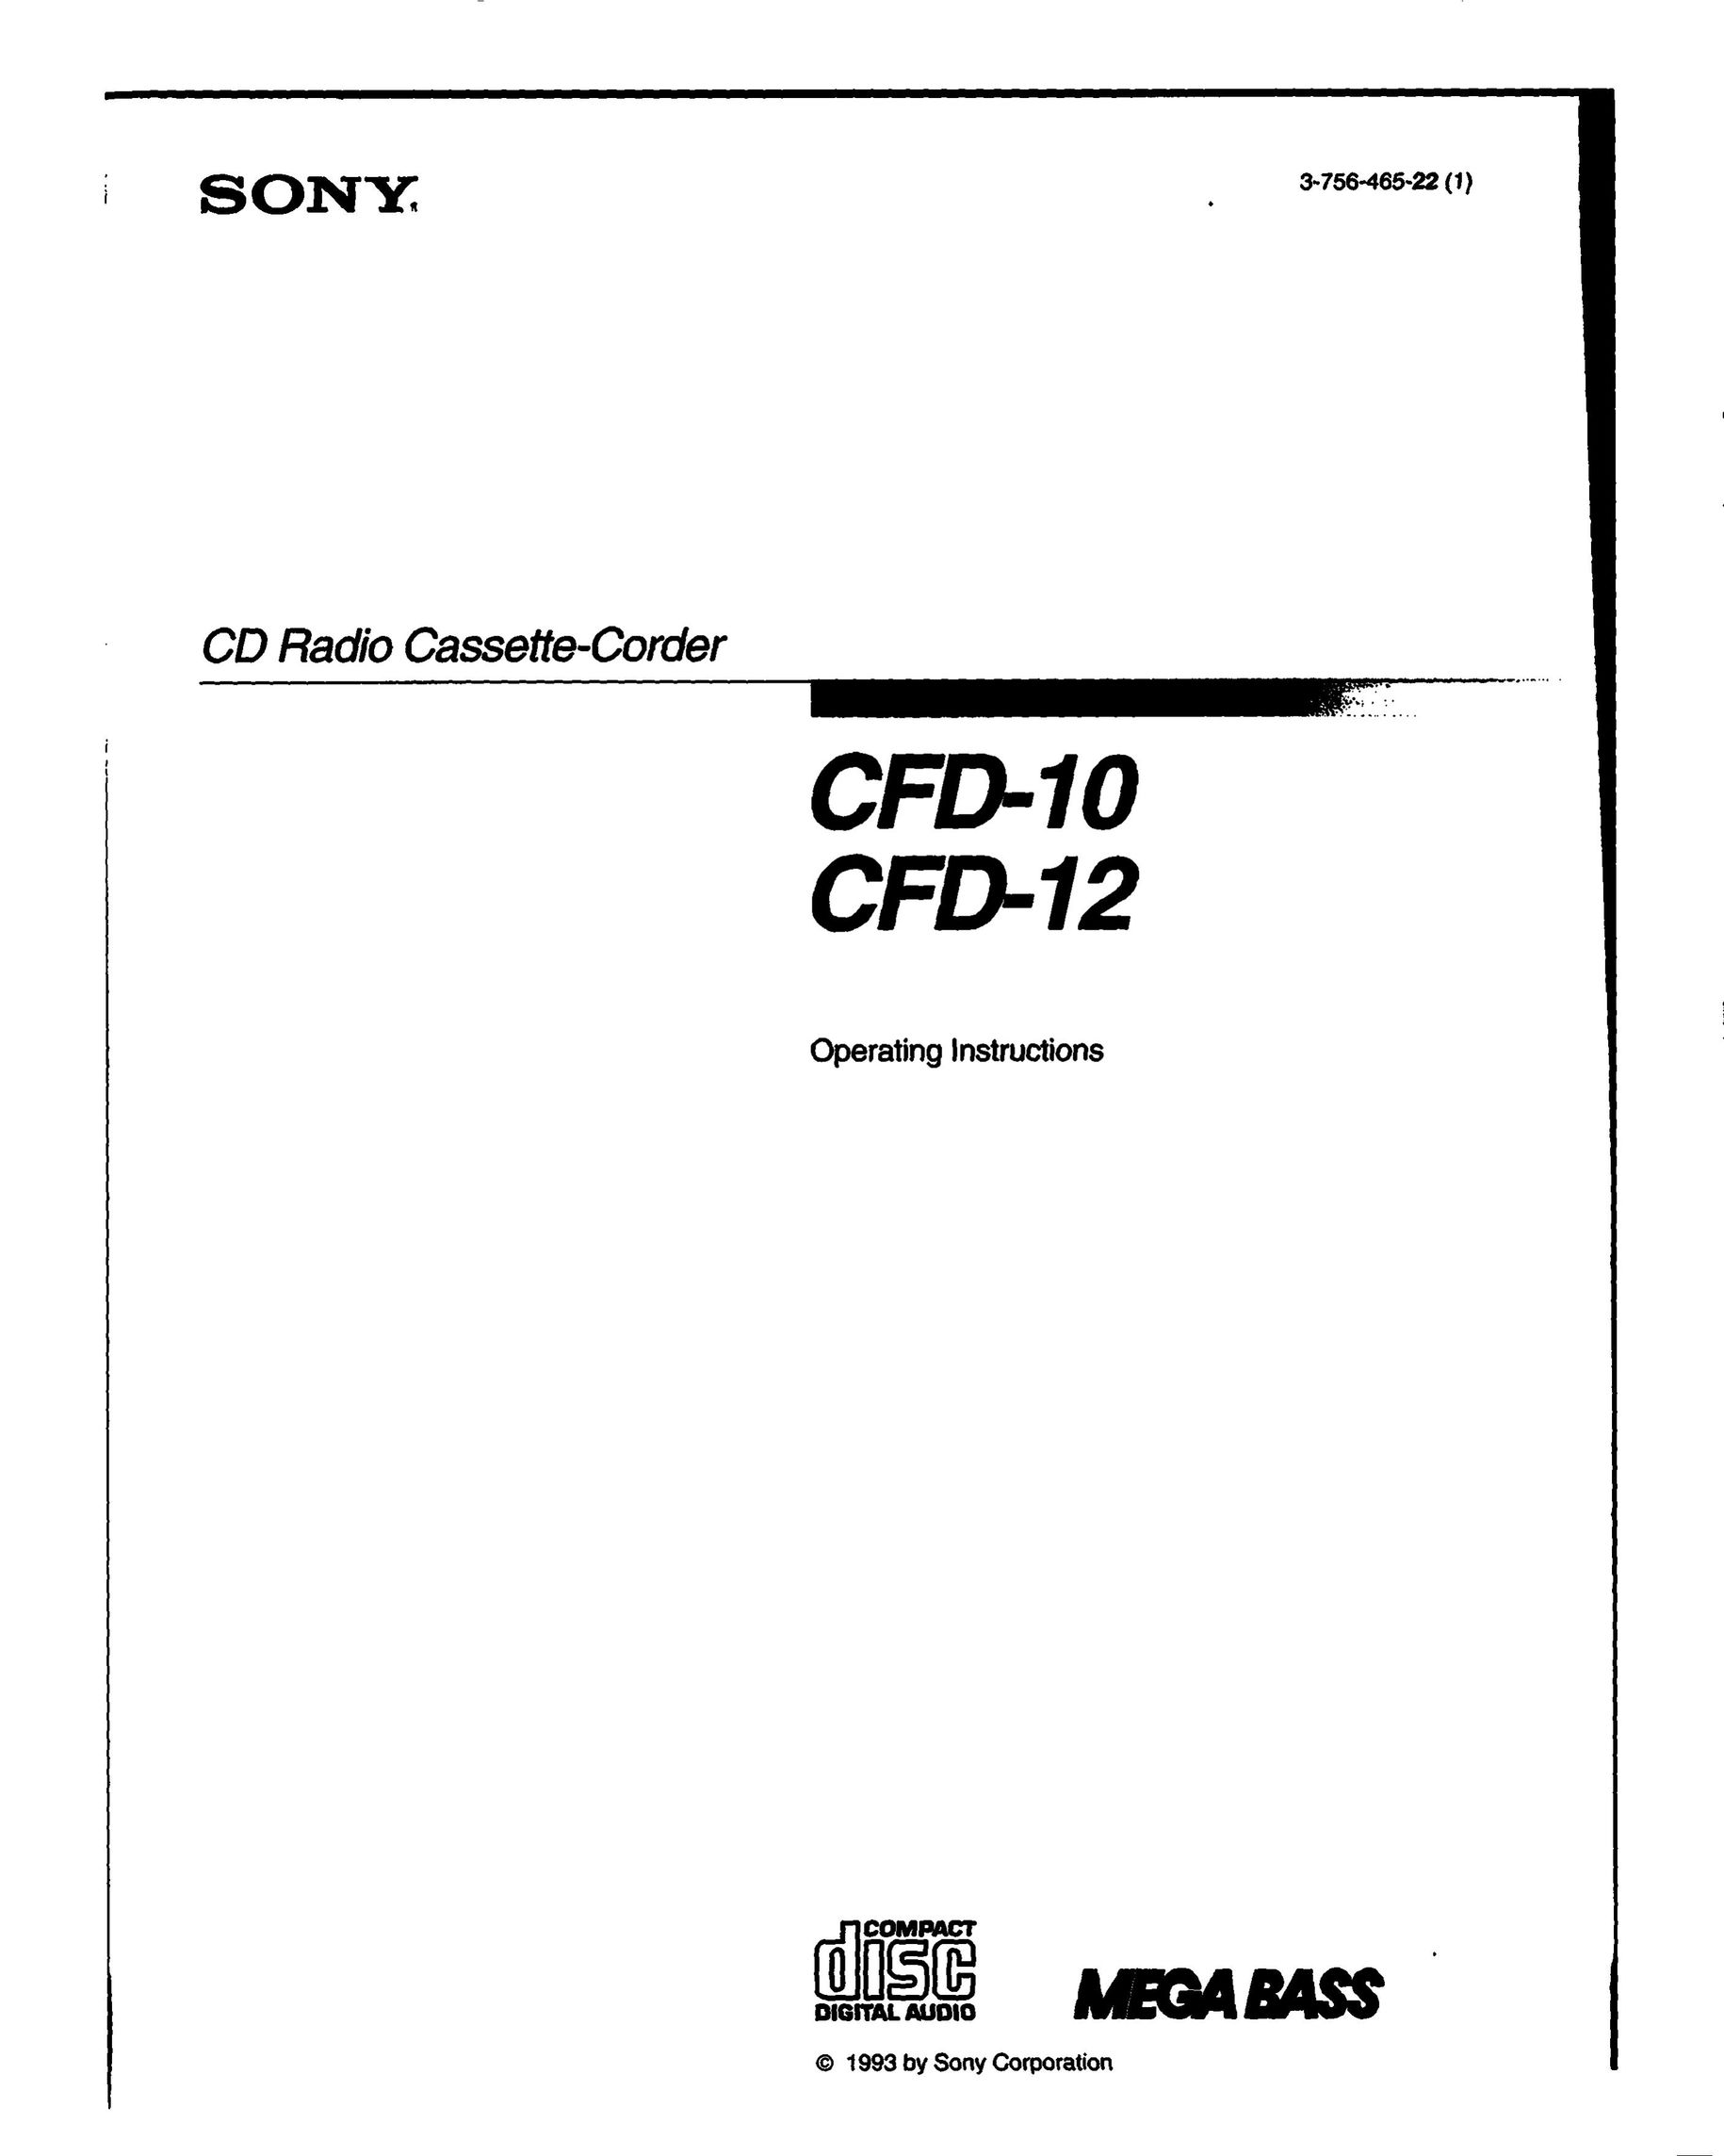 Sony CFD-10 MP3 Player User Manual